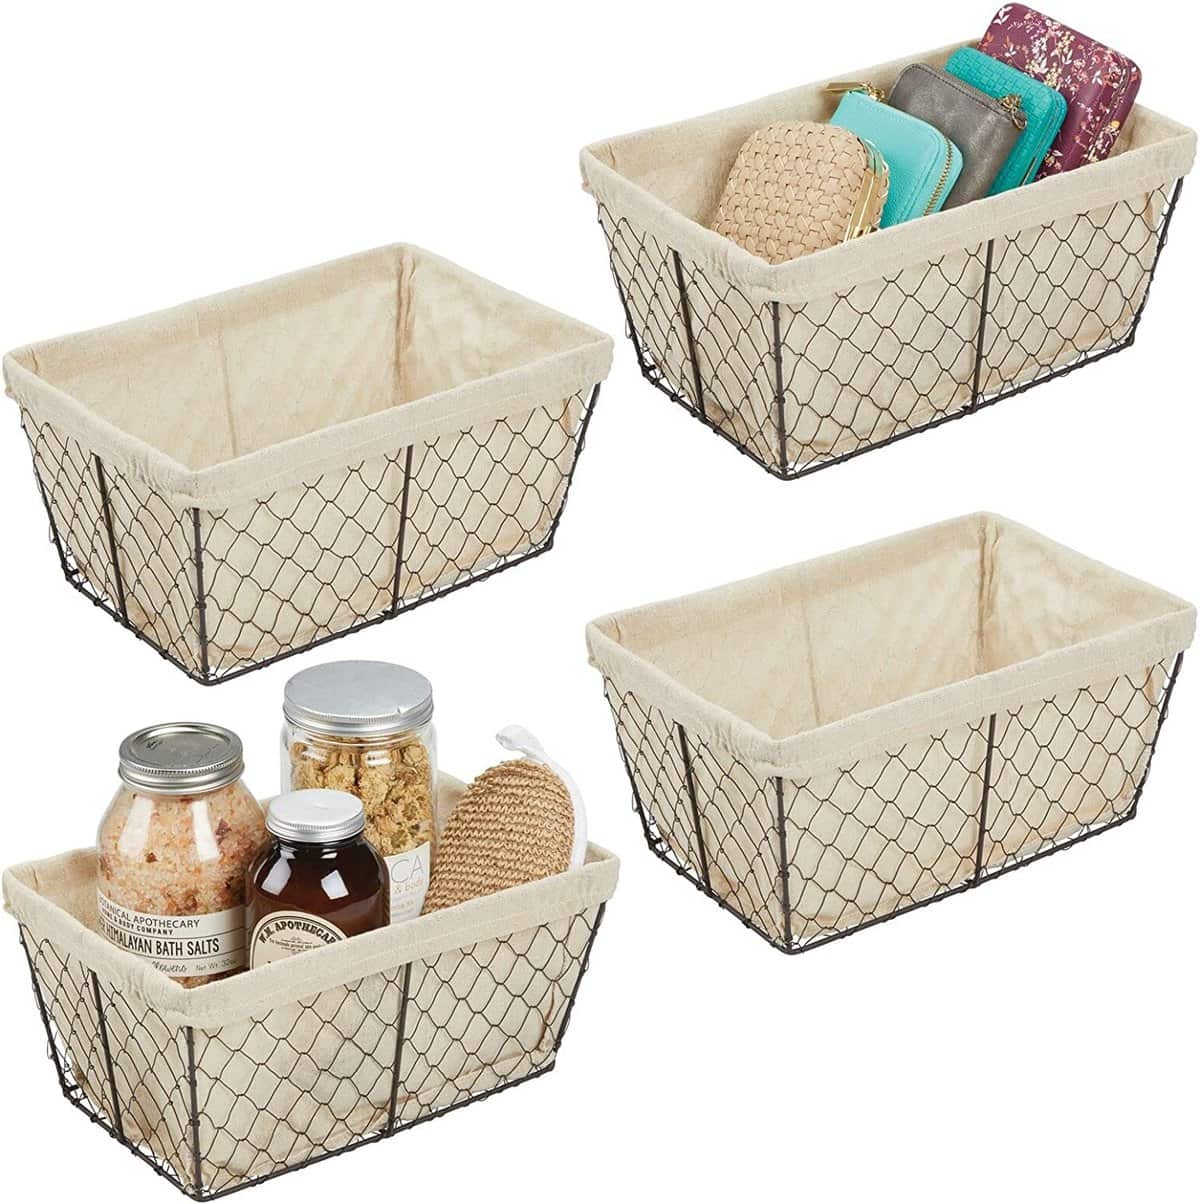 Pantry Organization Ideas - set of four plastic wire baskets with off-white fabric liners.